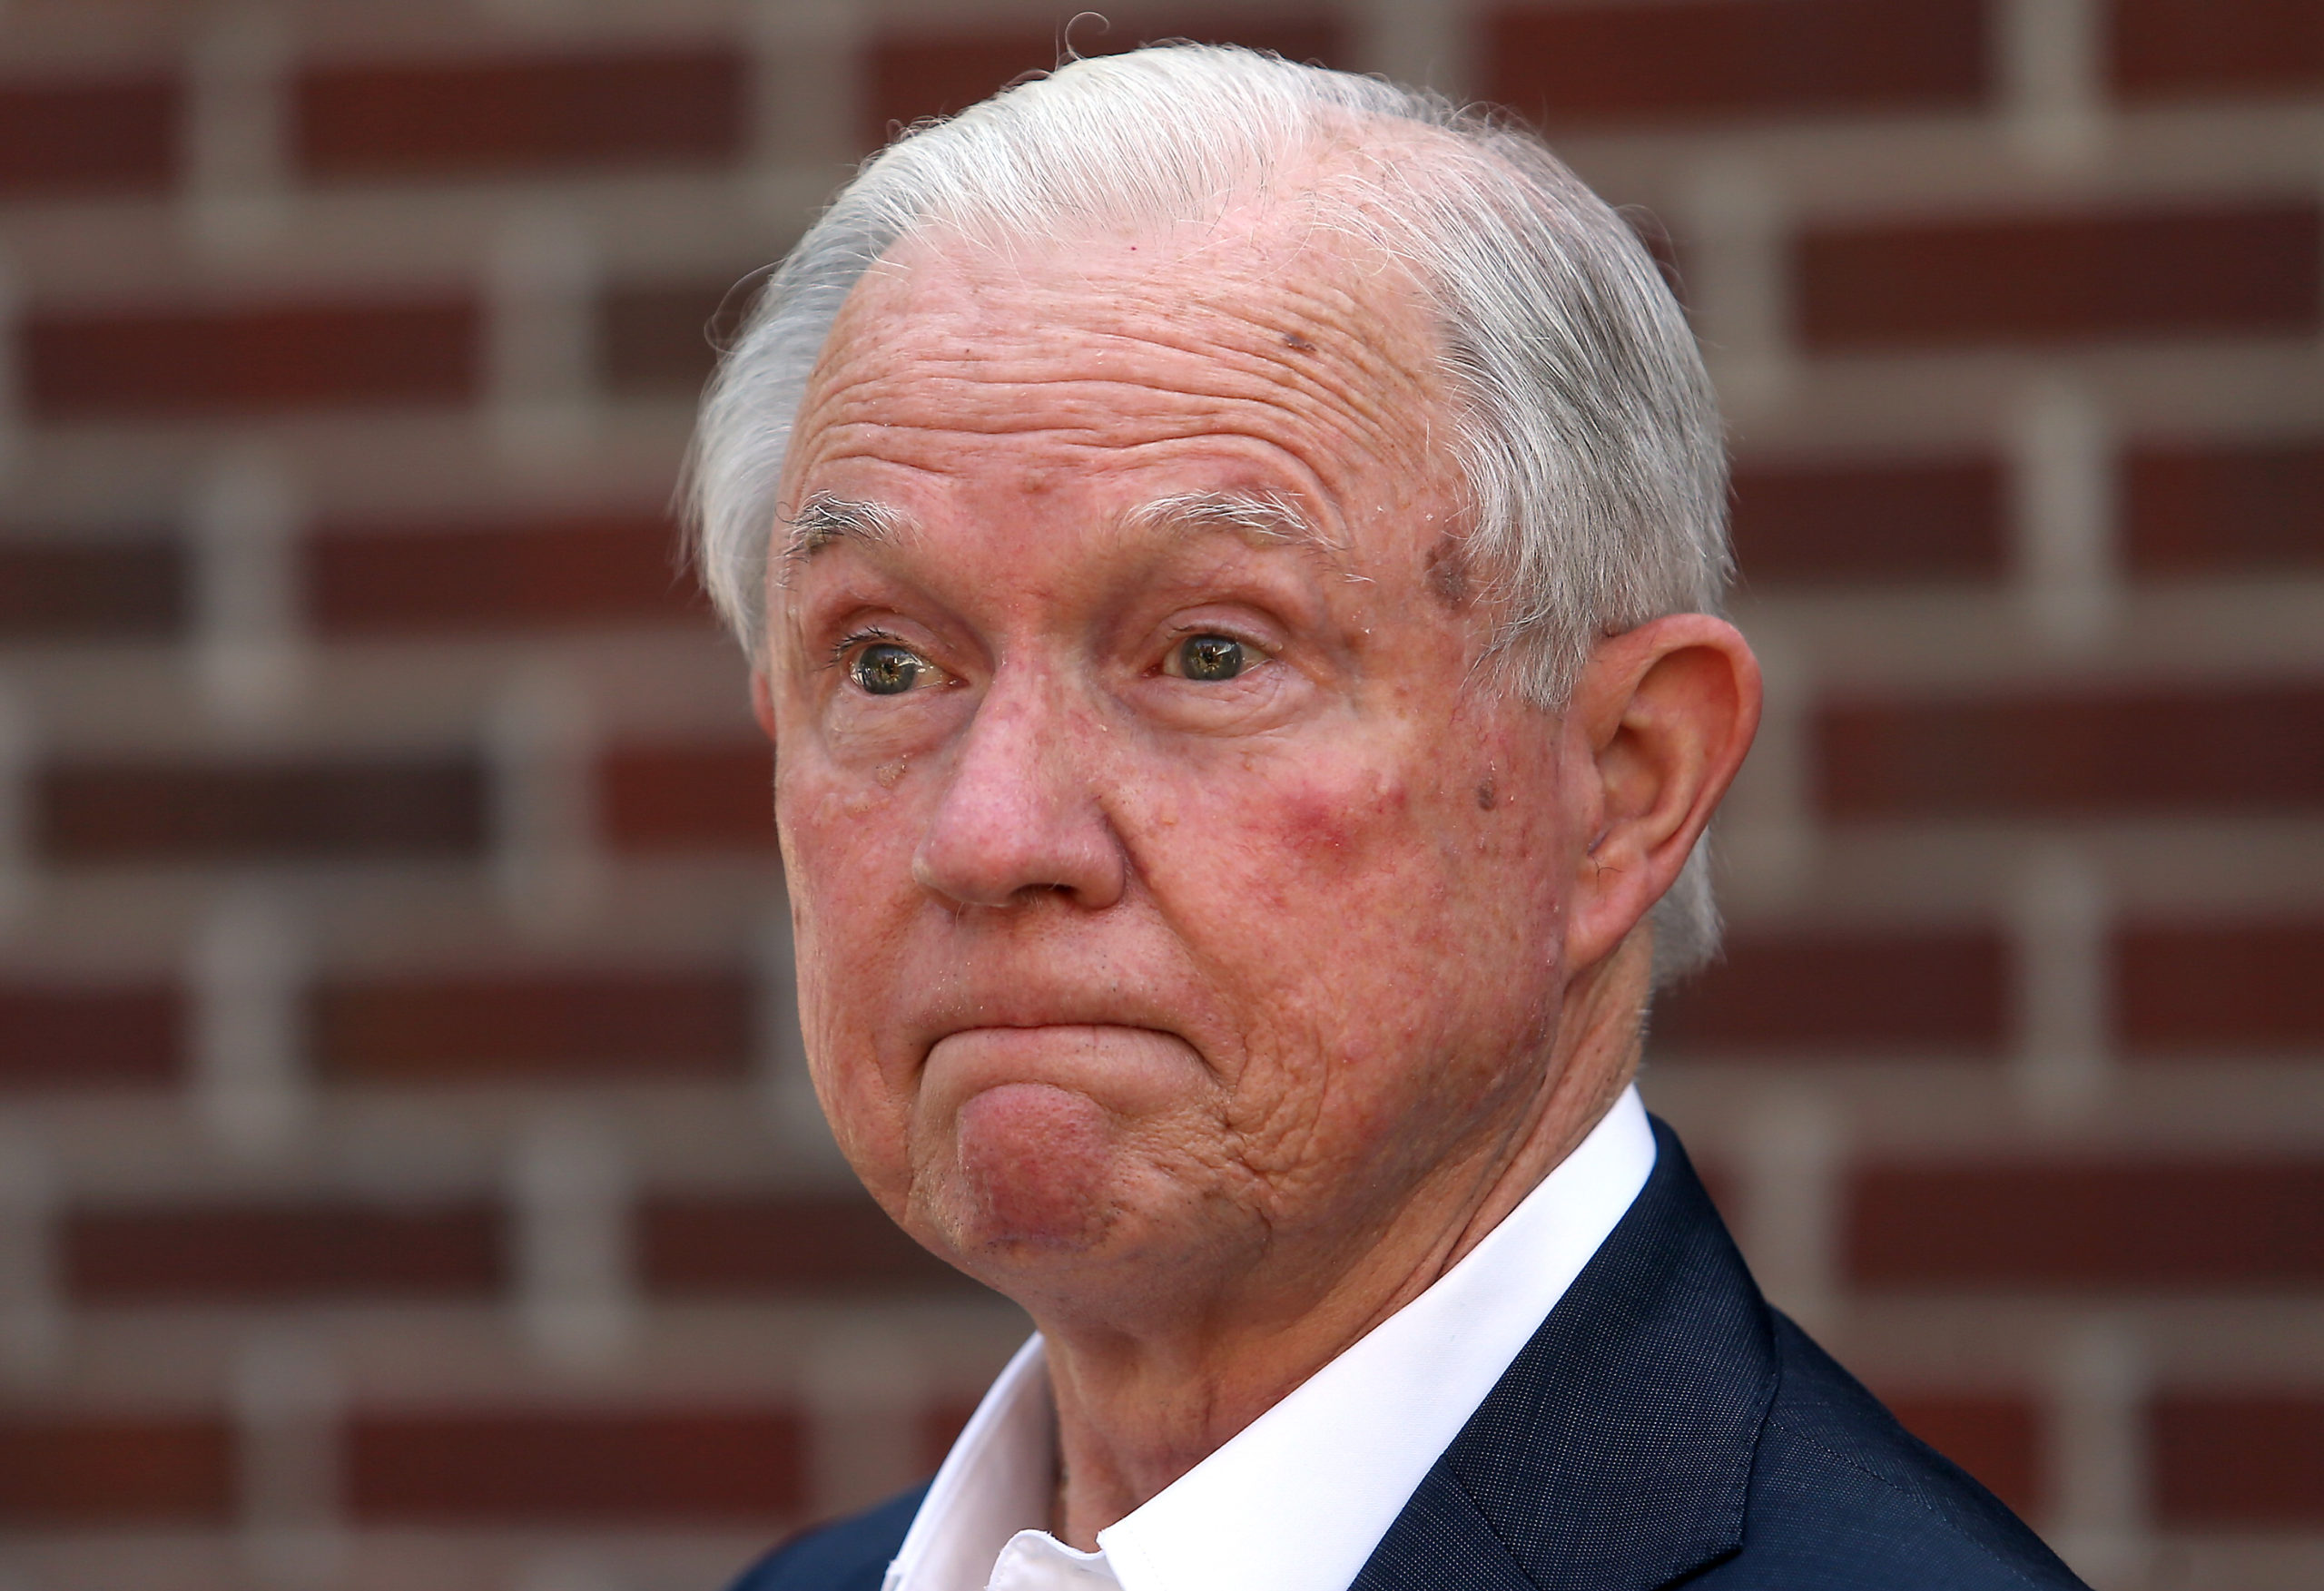 Former Attorney General Jeff Sessions addresses the media after voting Tuesday in the Alabama Republican primary runoff for the U.S. Senate.